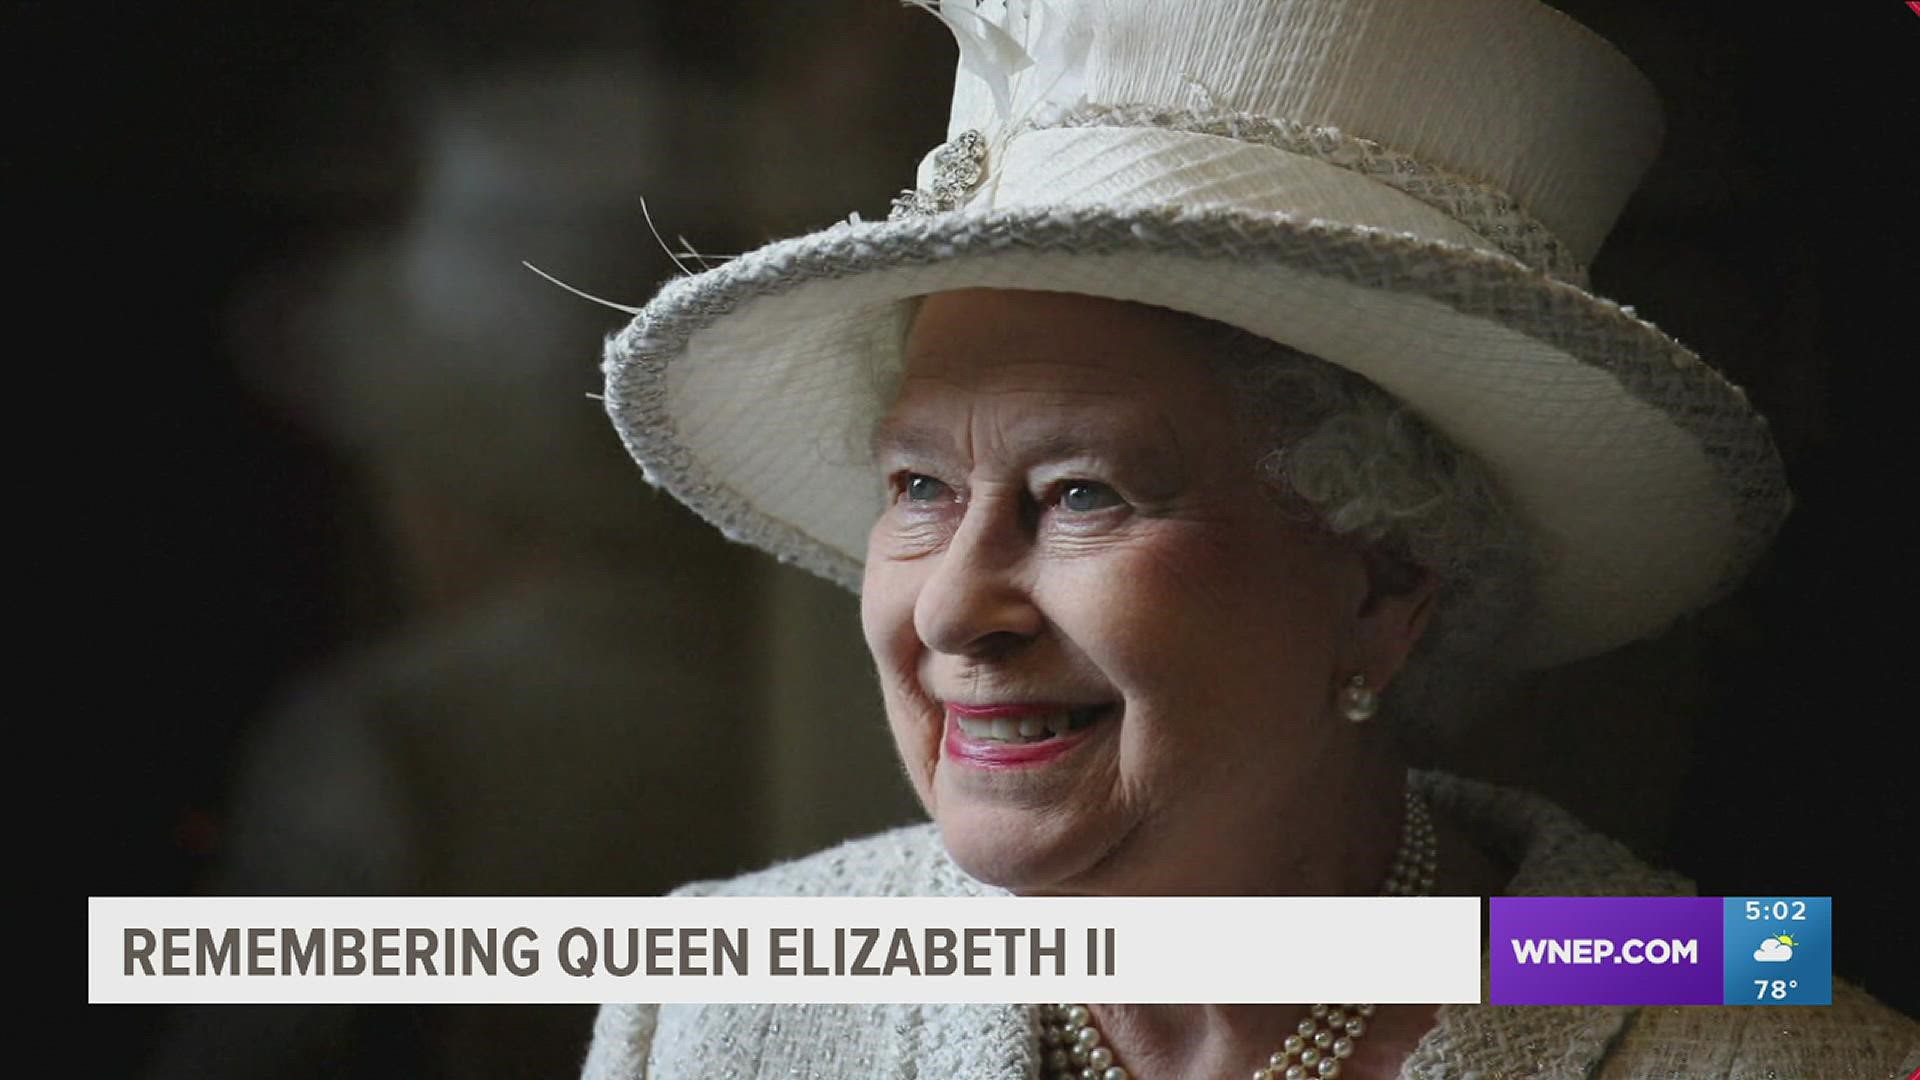 Newswatch 16's Marshall Keely sat down with a Lackawanna County resident who has vivid memories of Queen Elizabeth II.